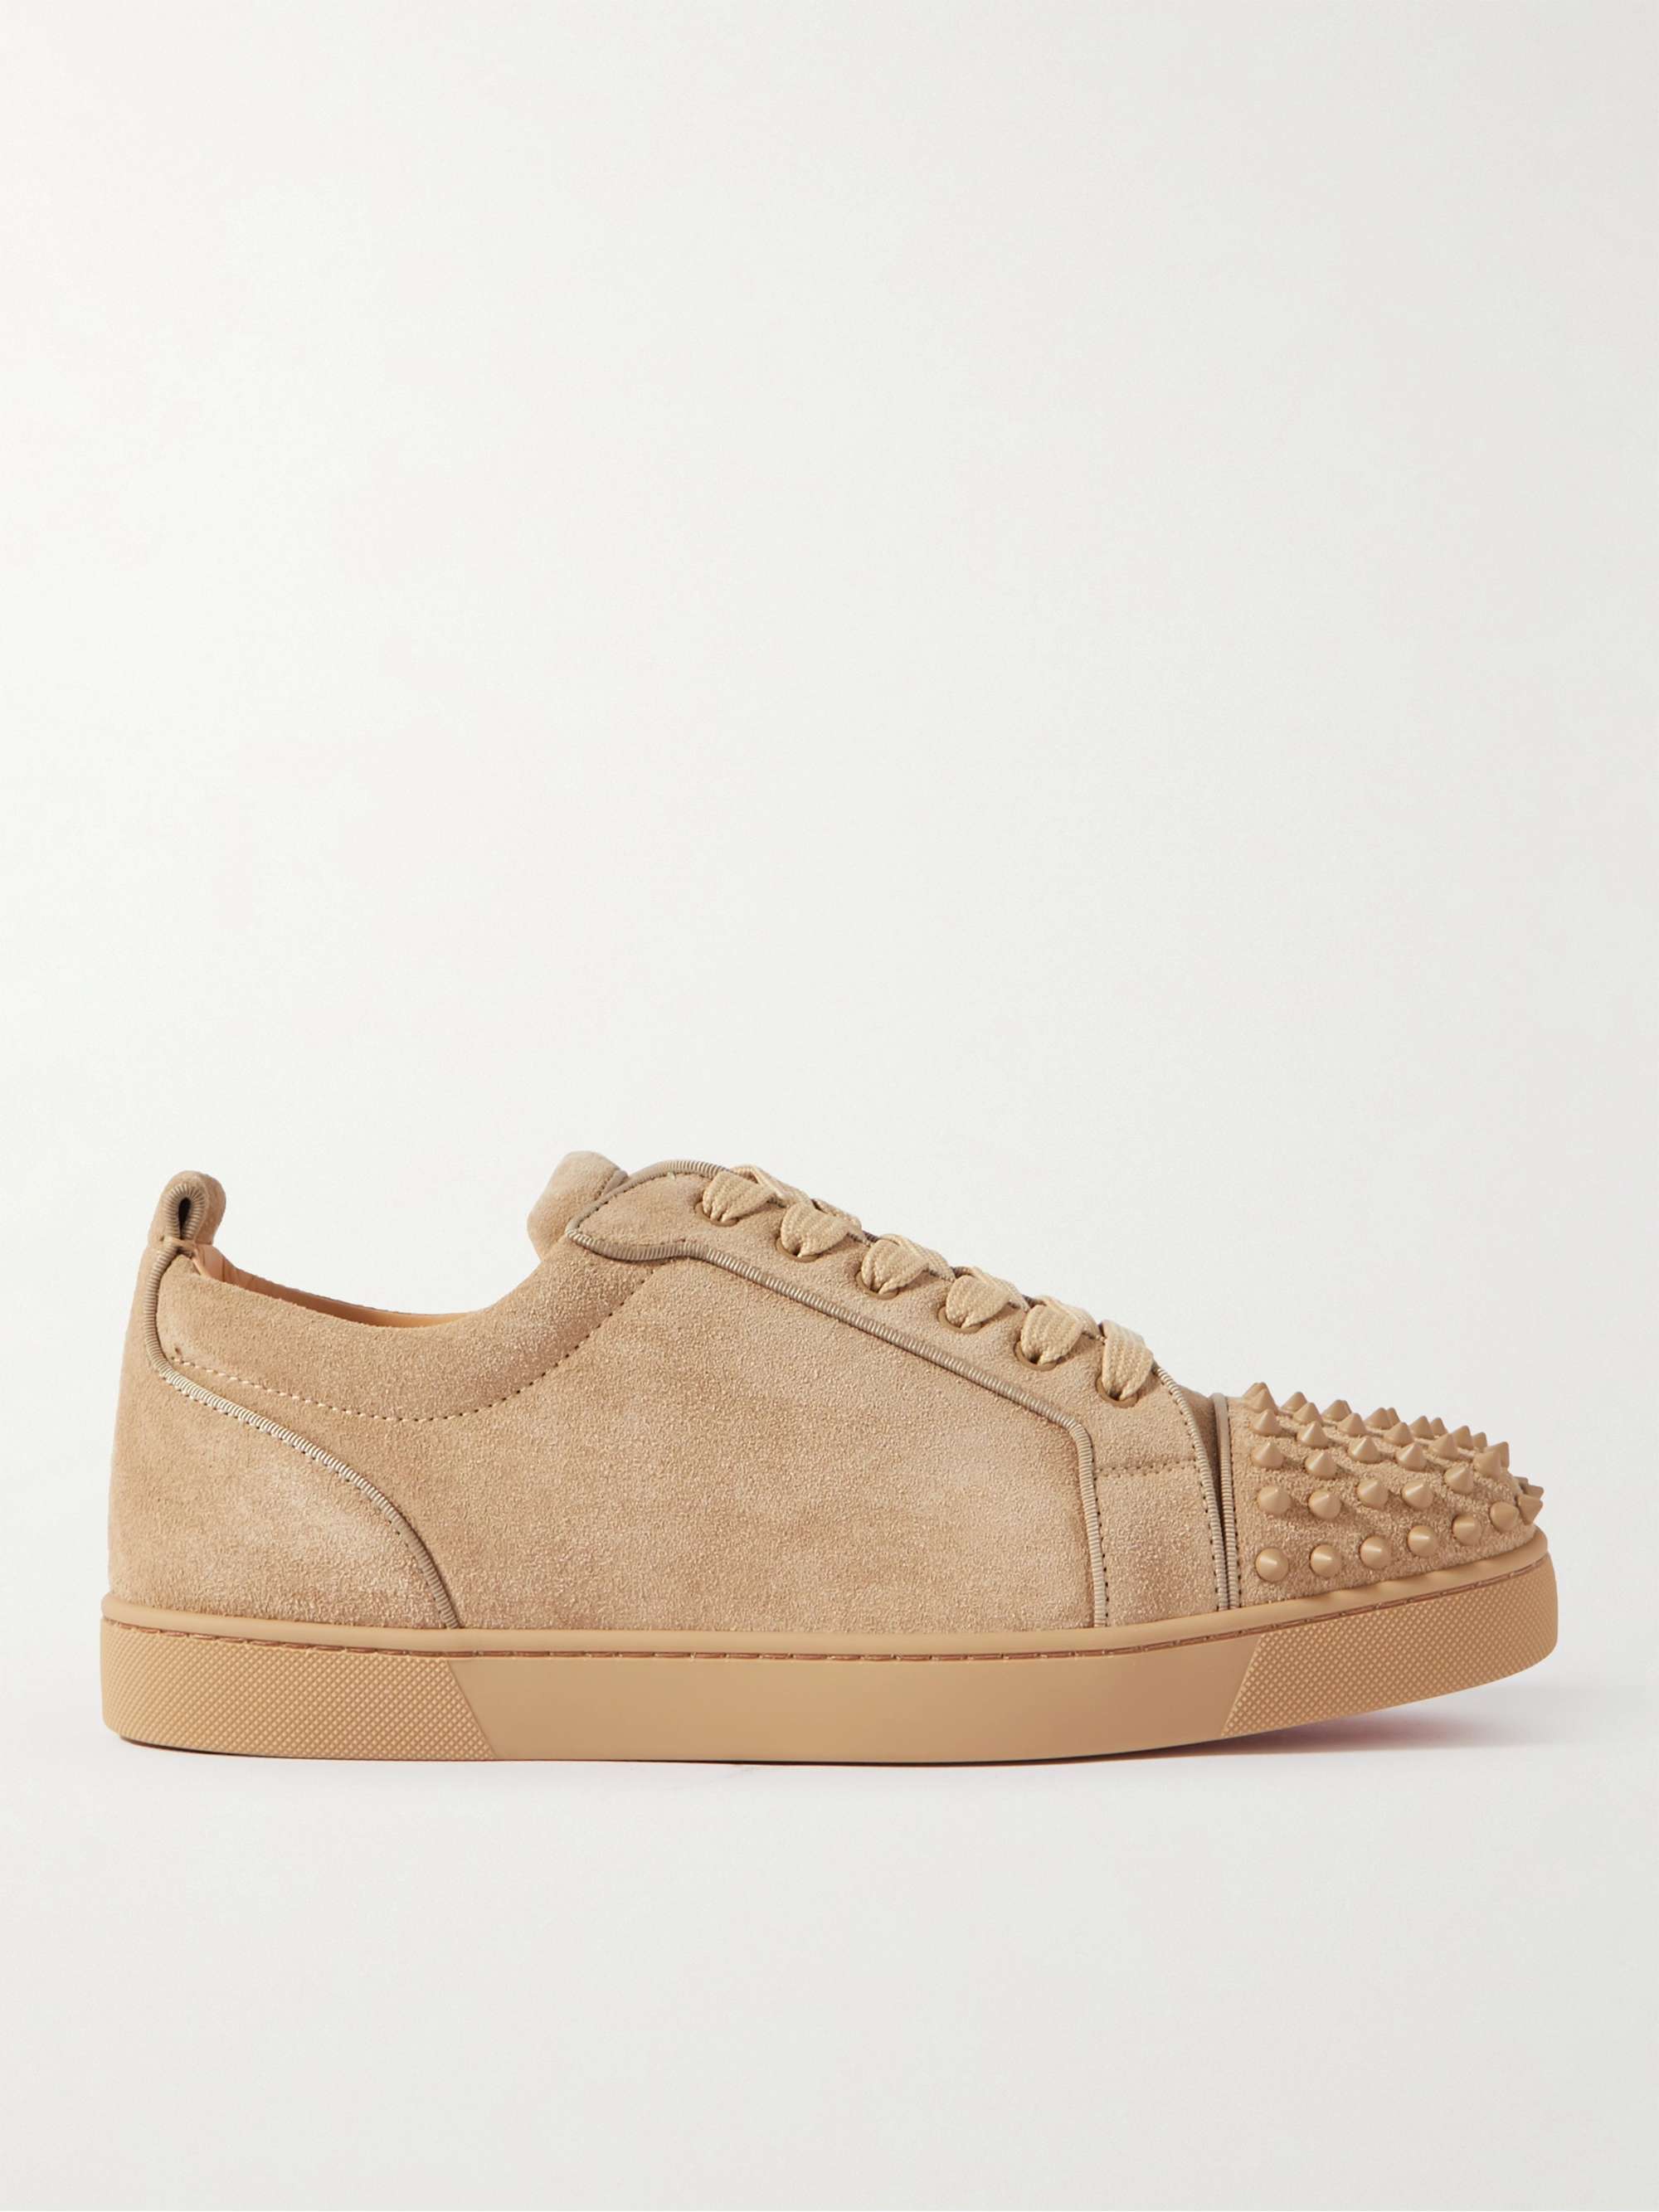 CHRISTIAN LOUBOUTIN Louis Junior Spiked Suede Sneakers for Men | MR PORTER